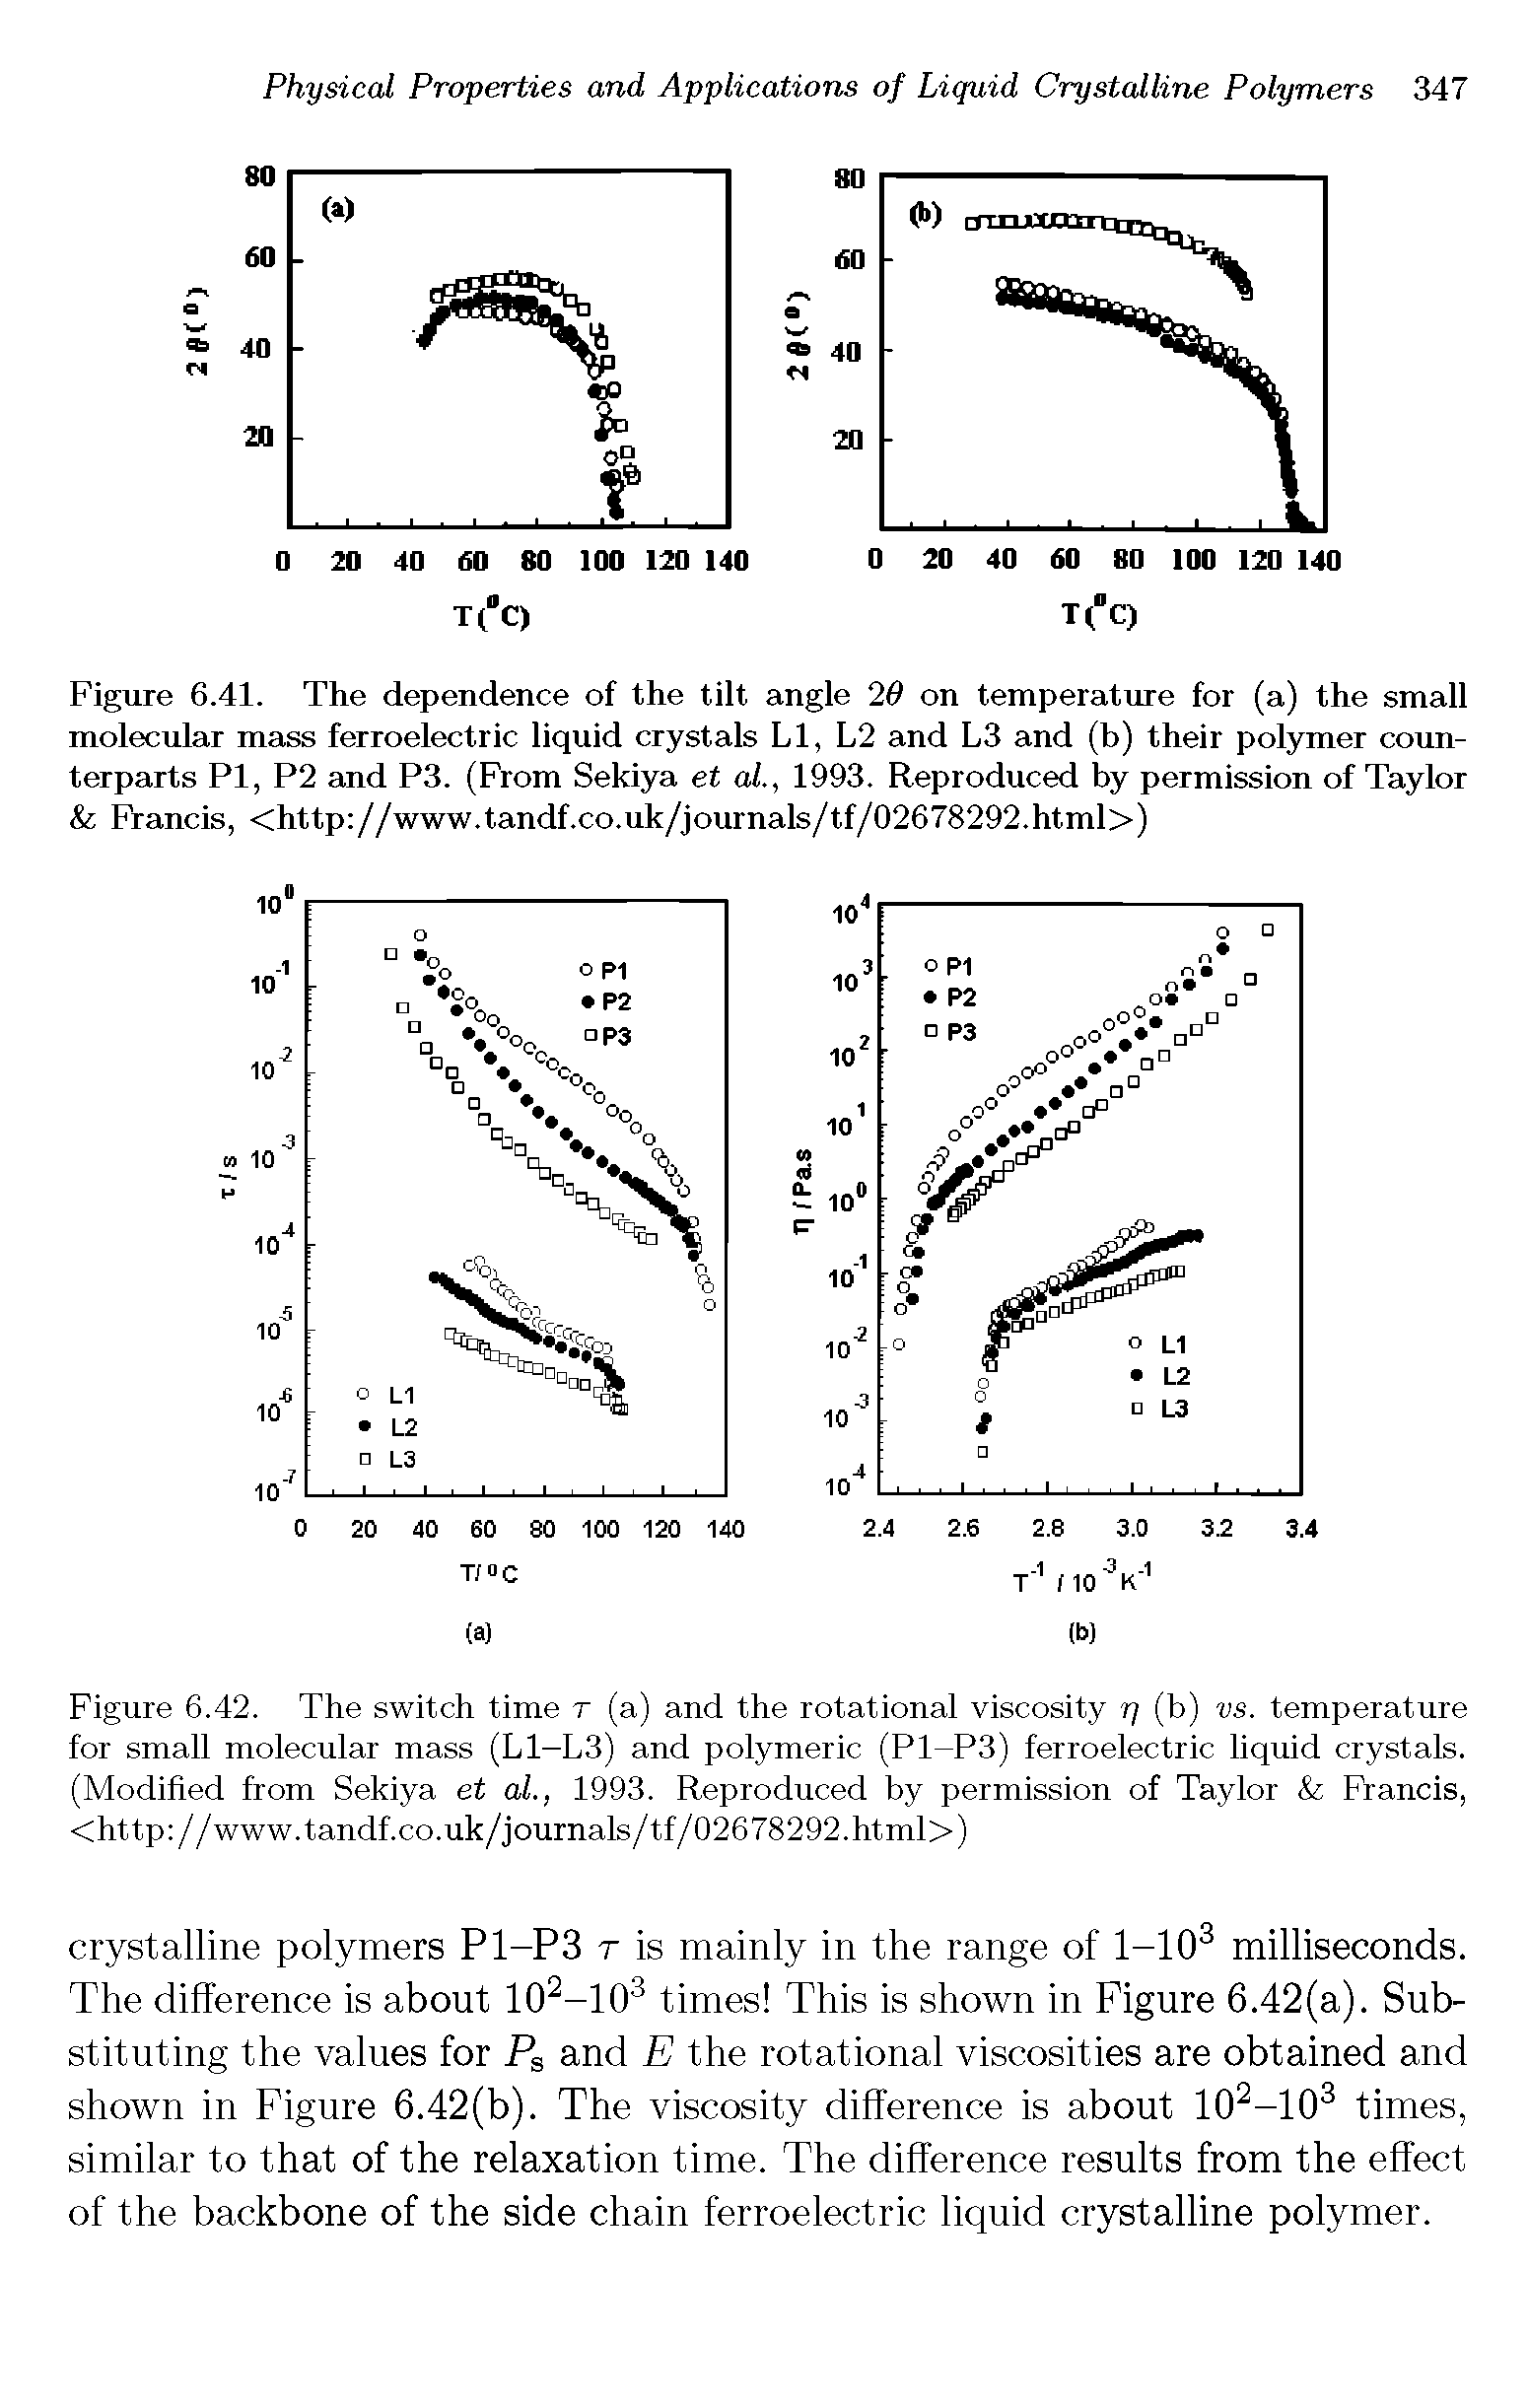 Figure 6.42. The switch time r (a) and the rotational viscosity q (b) vs. temperature for small molecular mass (L1-L3) and polymeric (P1-P3) ferroelectric liquid crystals. (Modified from Sekiya et al., 1993. Reproduced by permission of Taylor Francis, <http //www. tandf.co.uk/journals/tf/02678292.html>)...